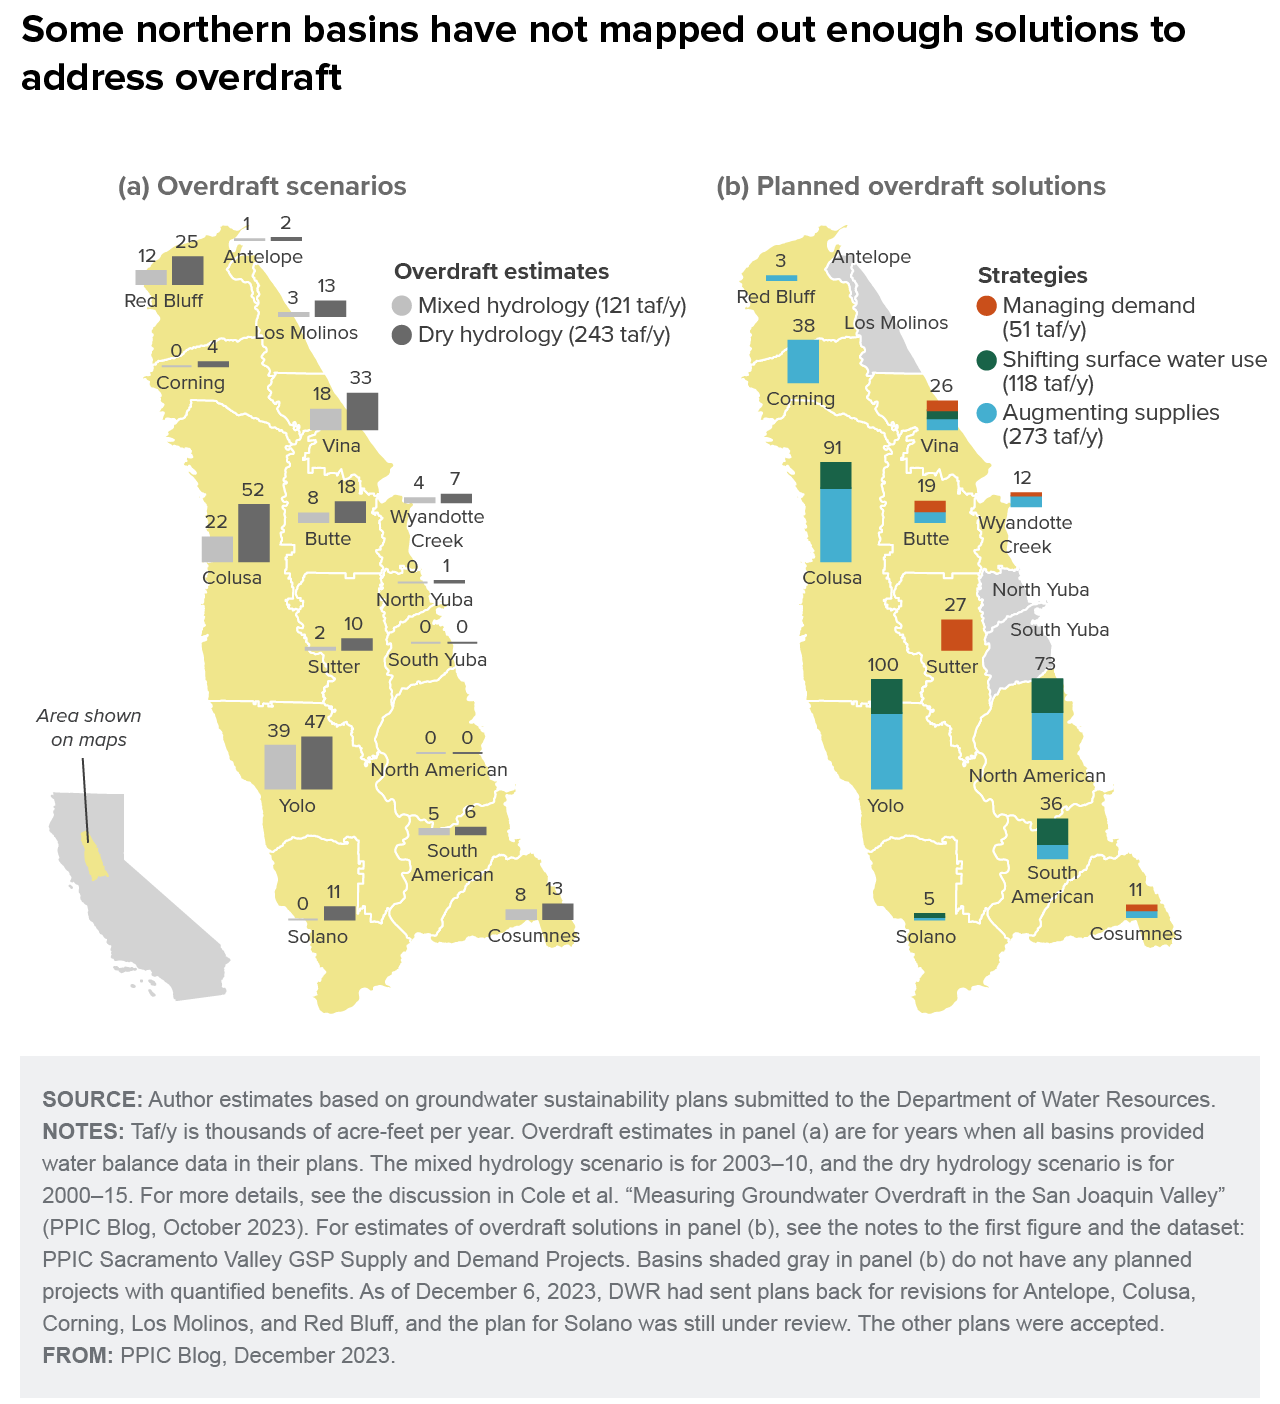 figure - Some northern basins have not mapped out enough solutions to address overdraft